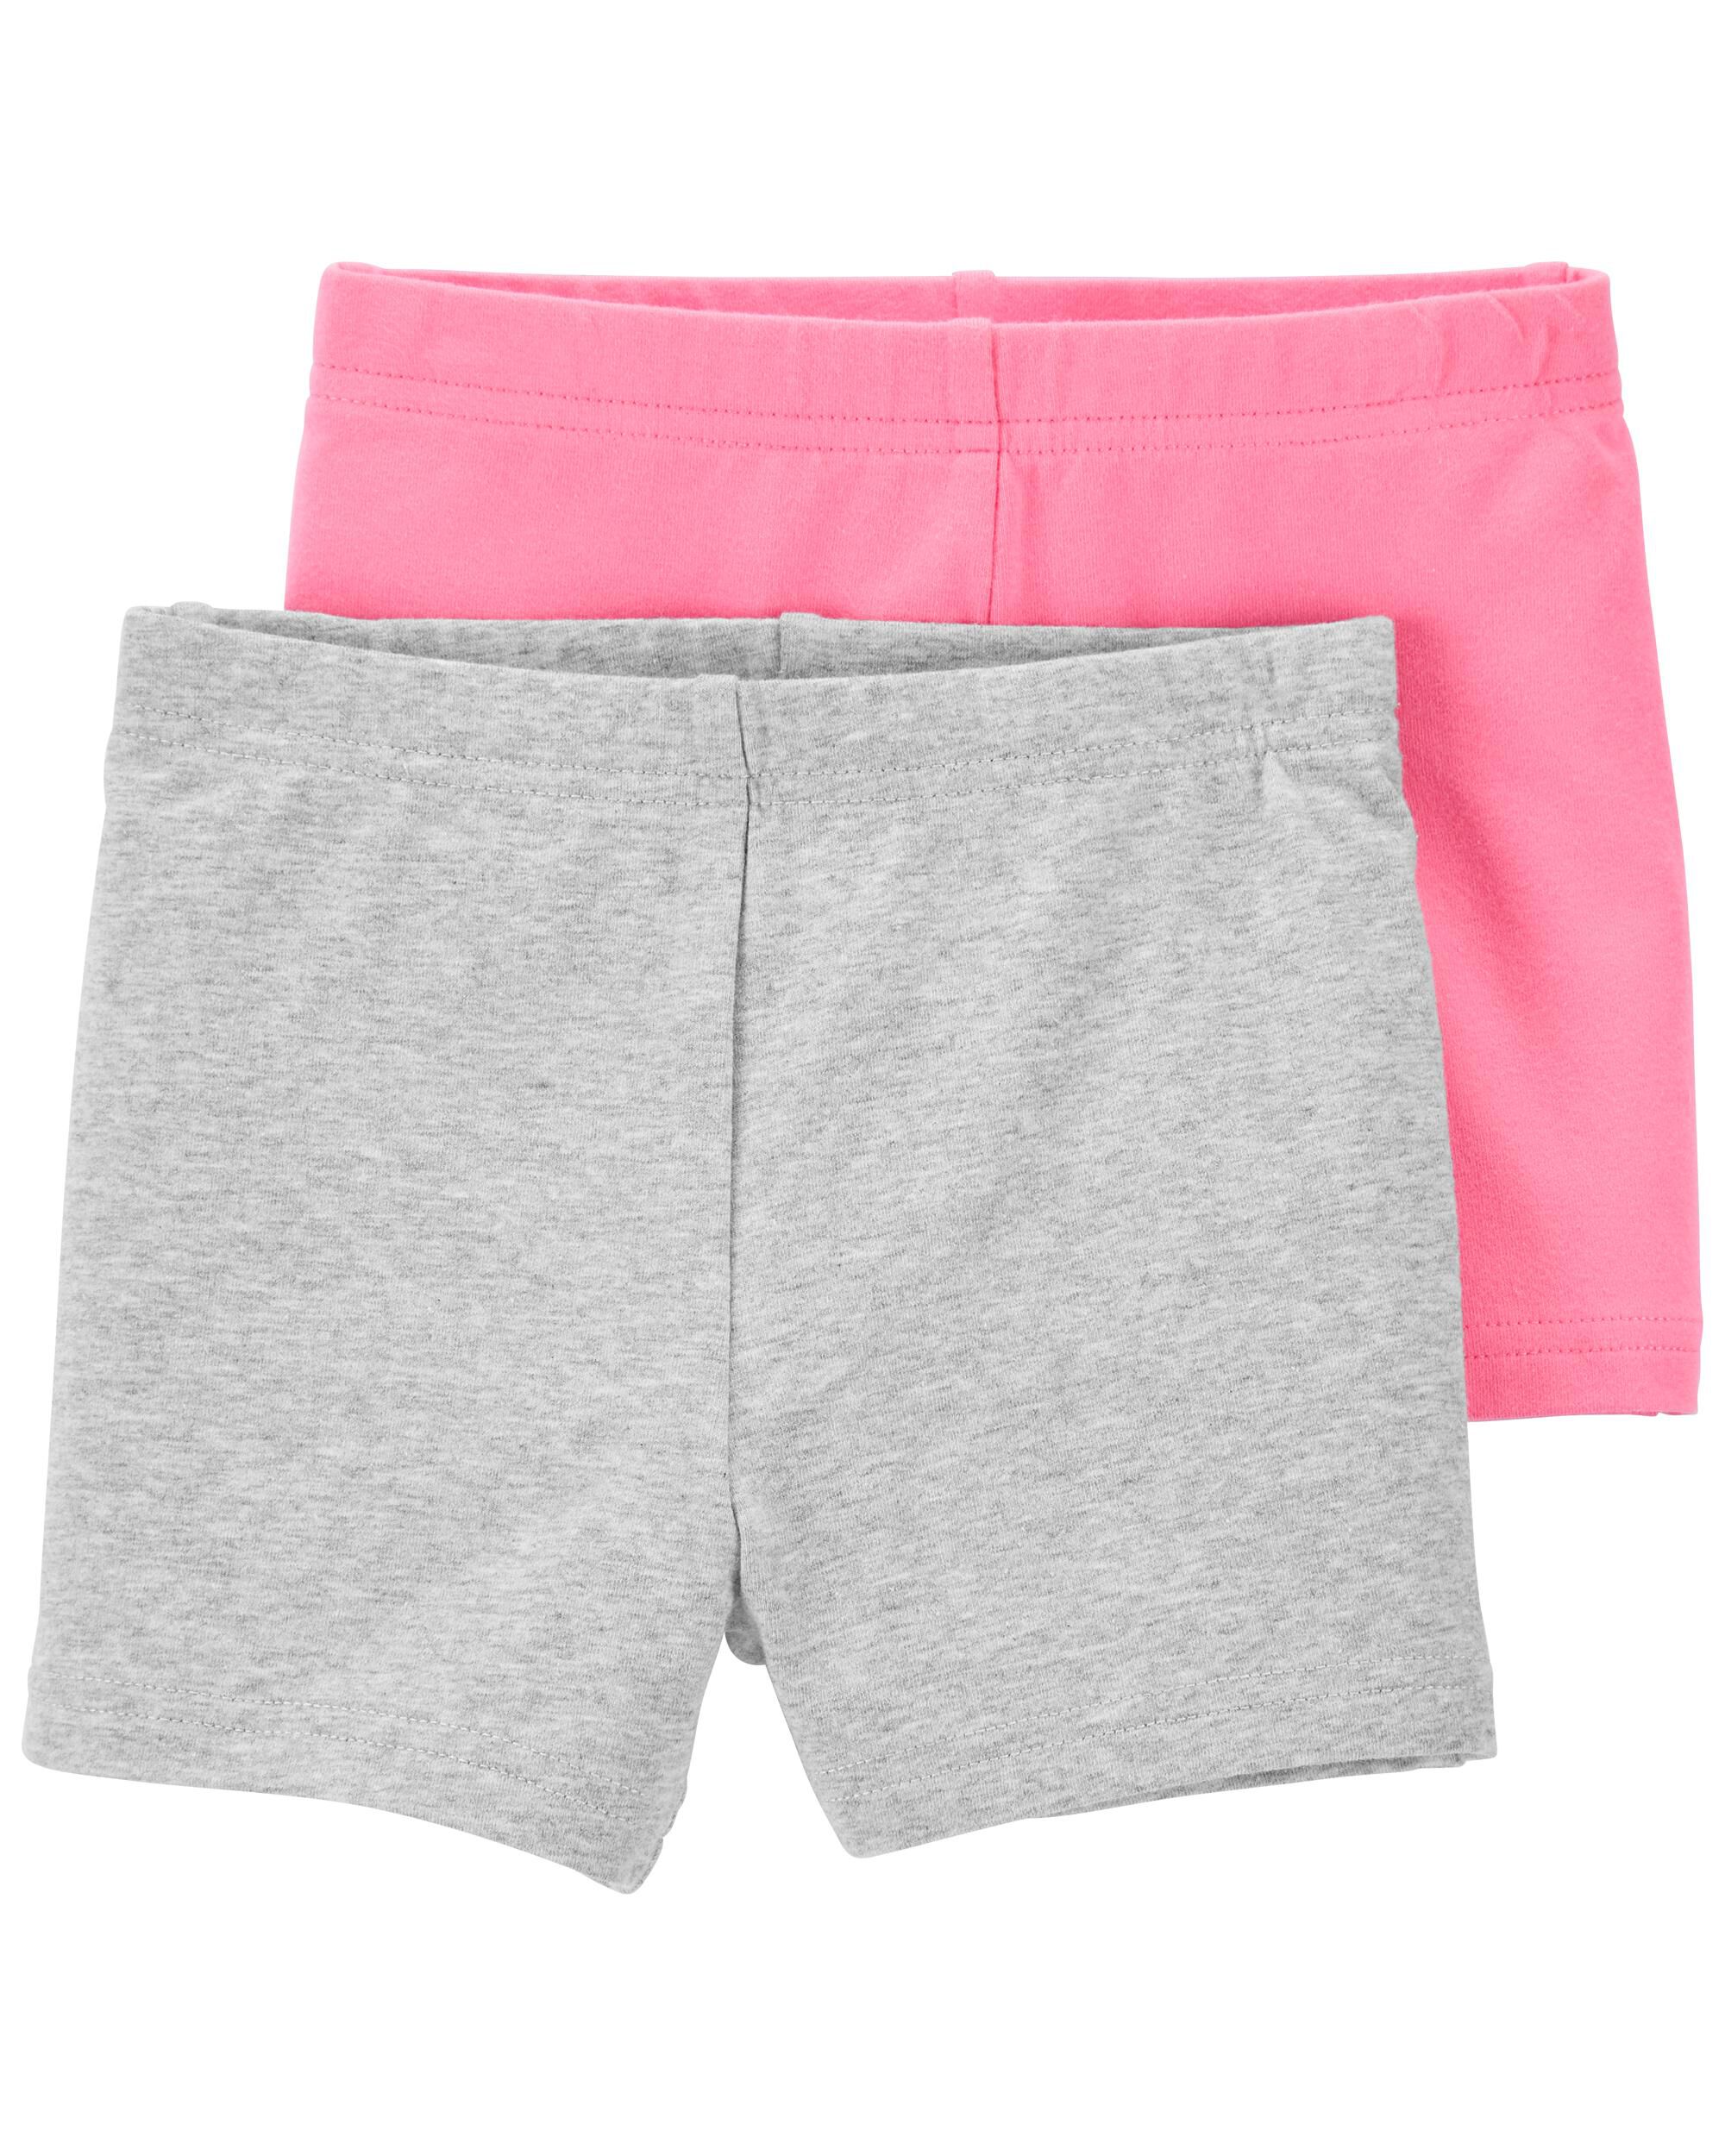 Simple Joys by Carters Girls 3-Pack Bike Shorts 